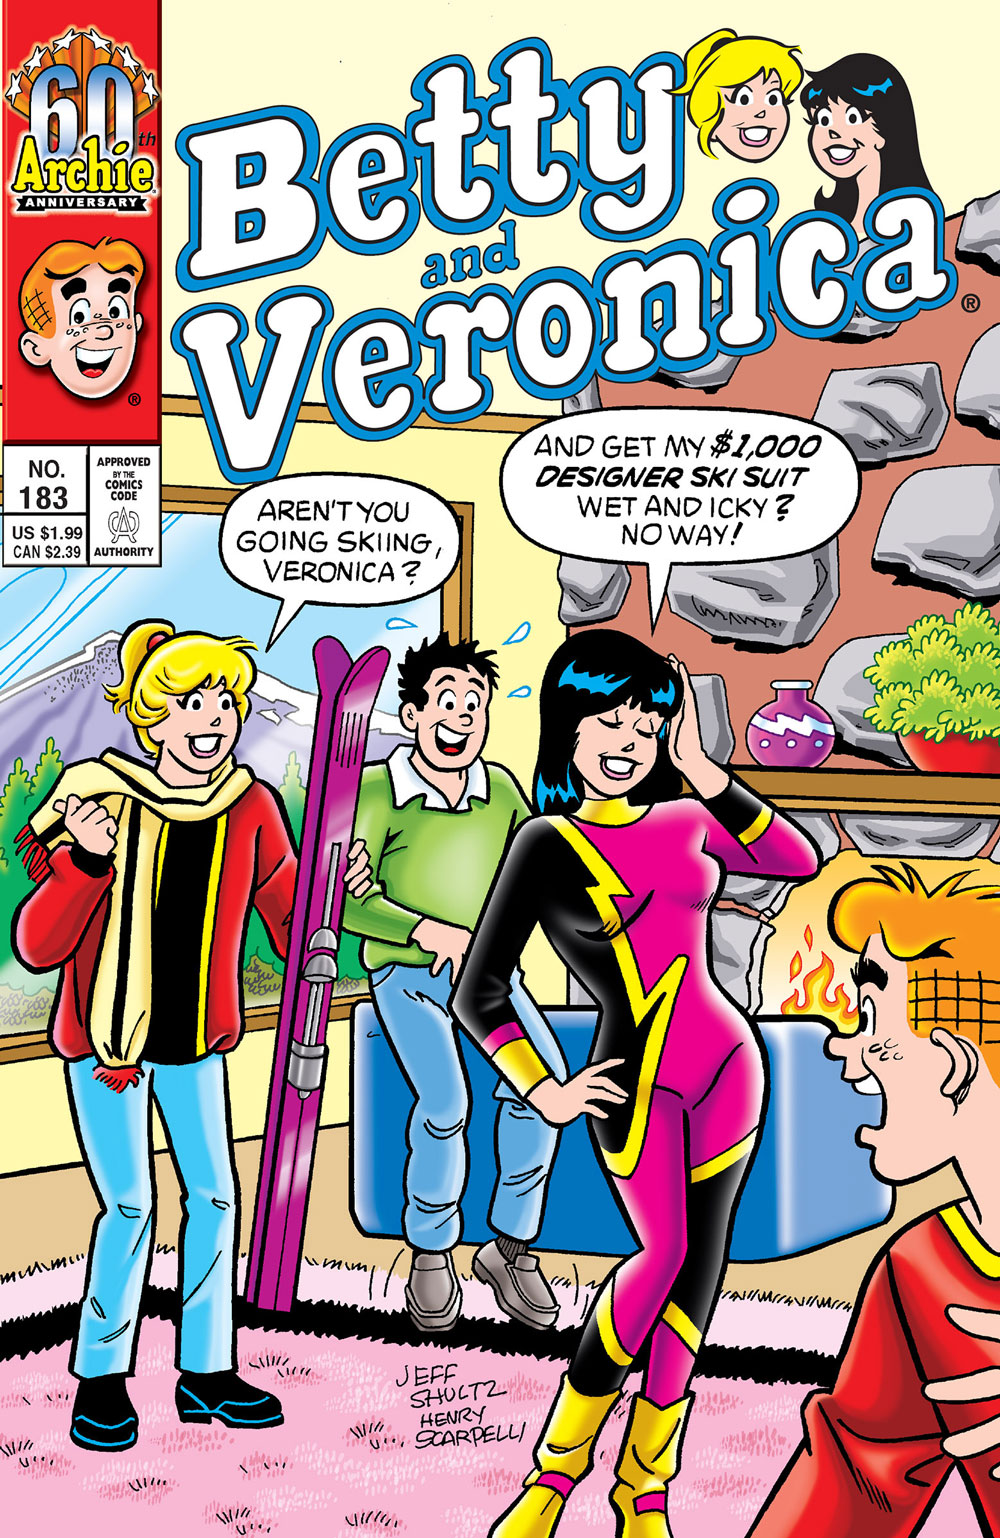 Betty, Veronica, Reggie, and Archie are at a winter ski lodge. Betty is holding skis while Veronica is empty handed, primping and modeling her new designer ski suit. Betty asks if she's going out skiing and she replies that she can't get her $1000 ski suit wet and icky. The boys look on excitedly. 